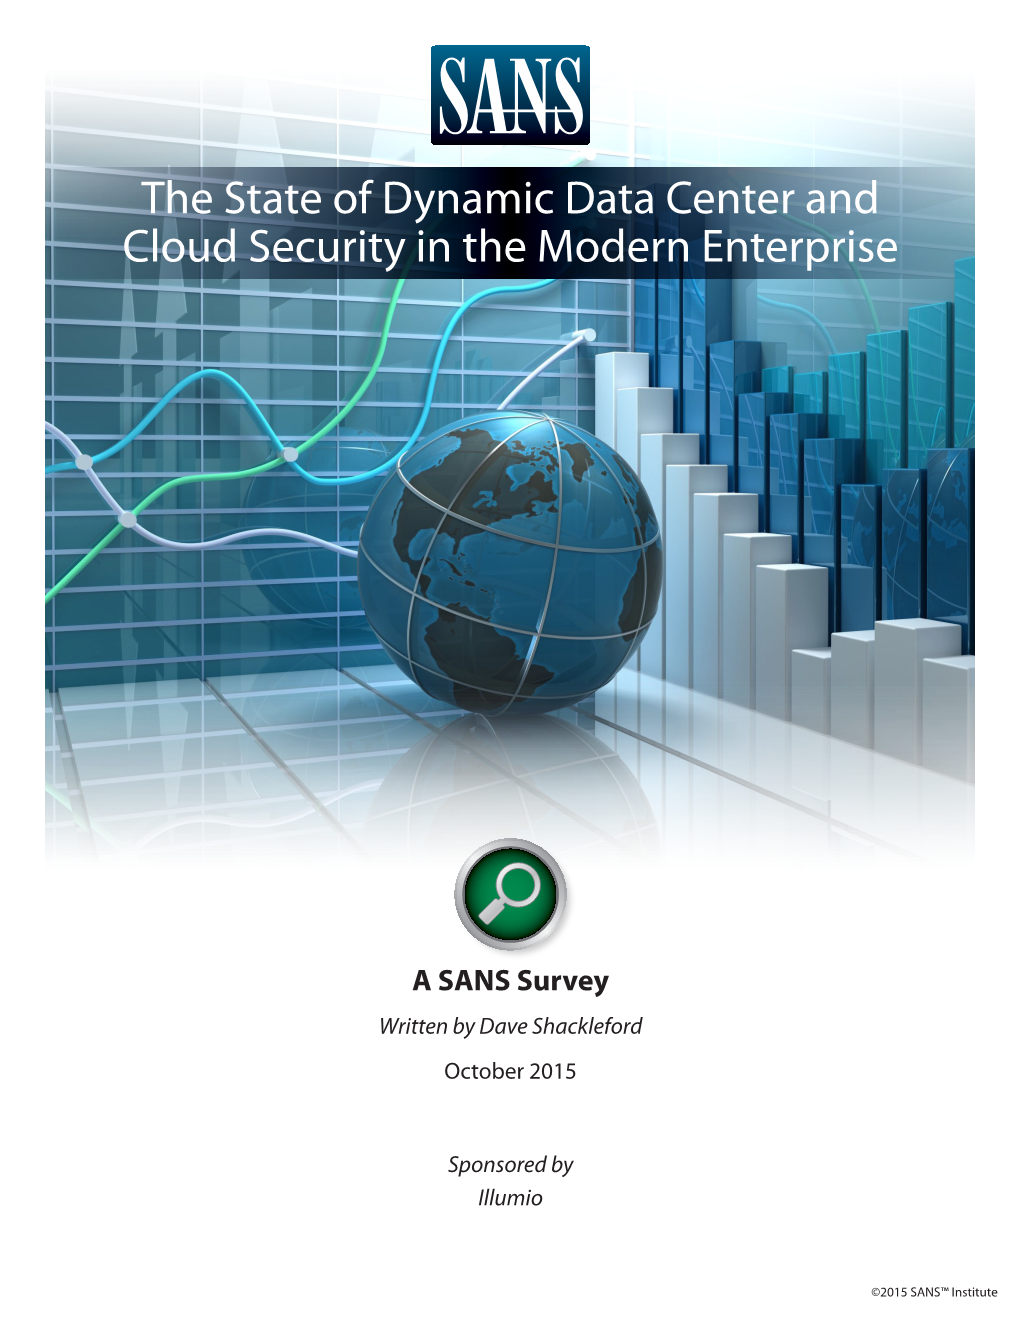 The State of Dynamic Data Center and Cloud Security in the Modern Enterprise